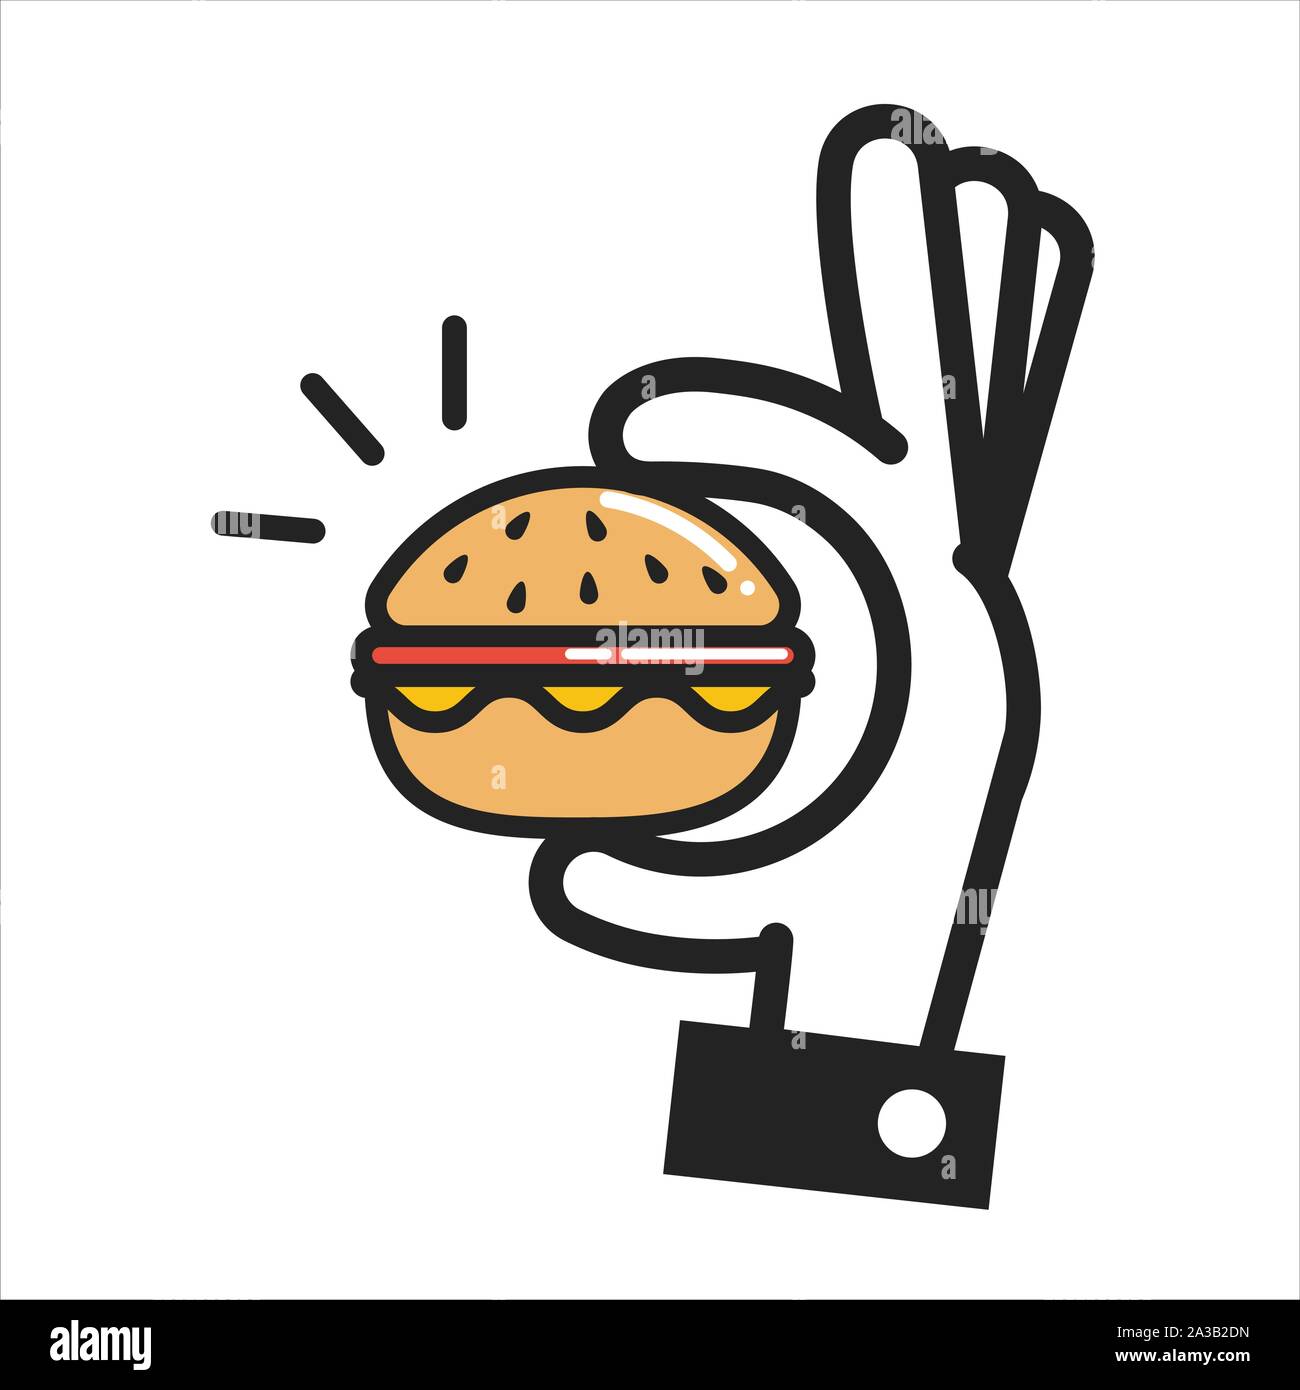 Thin line icon hand holding a burger, fast food icon isolated on white.  Stock Vector